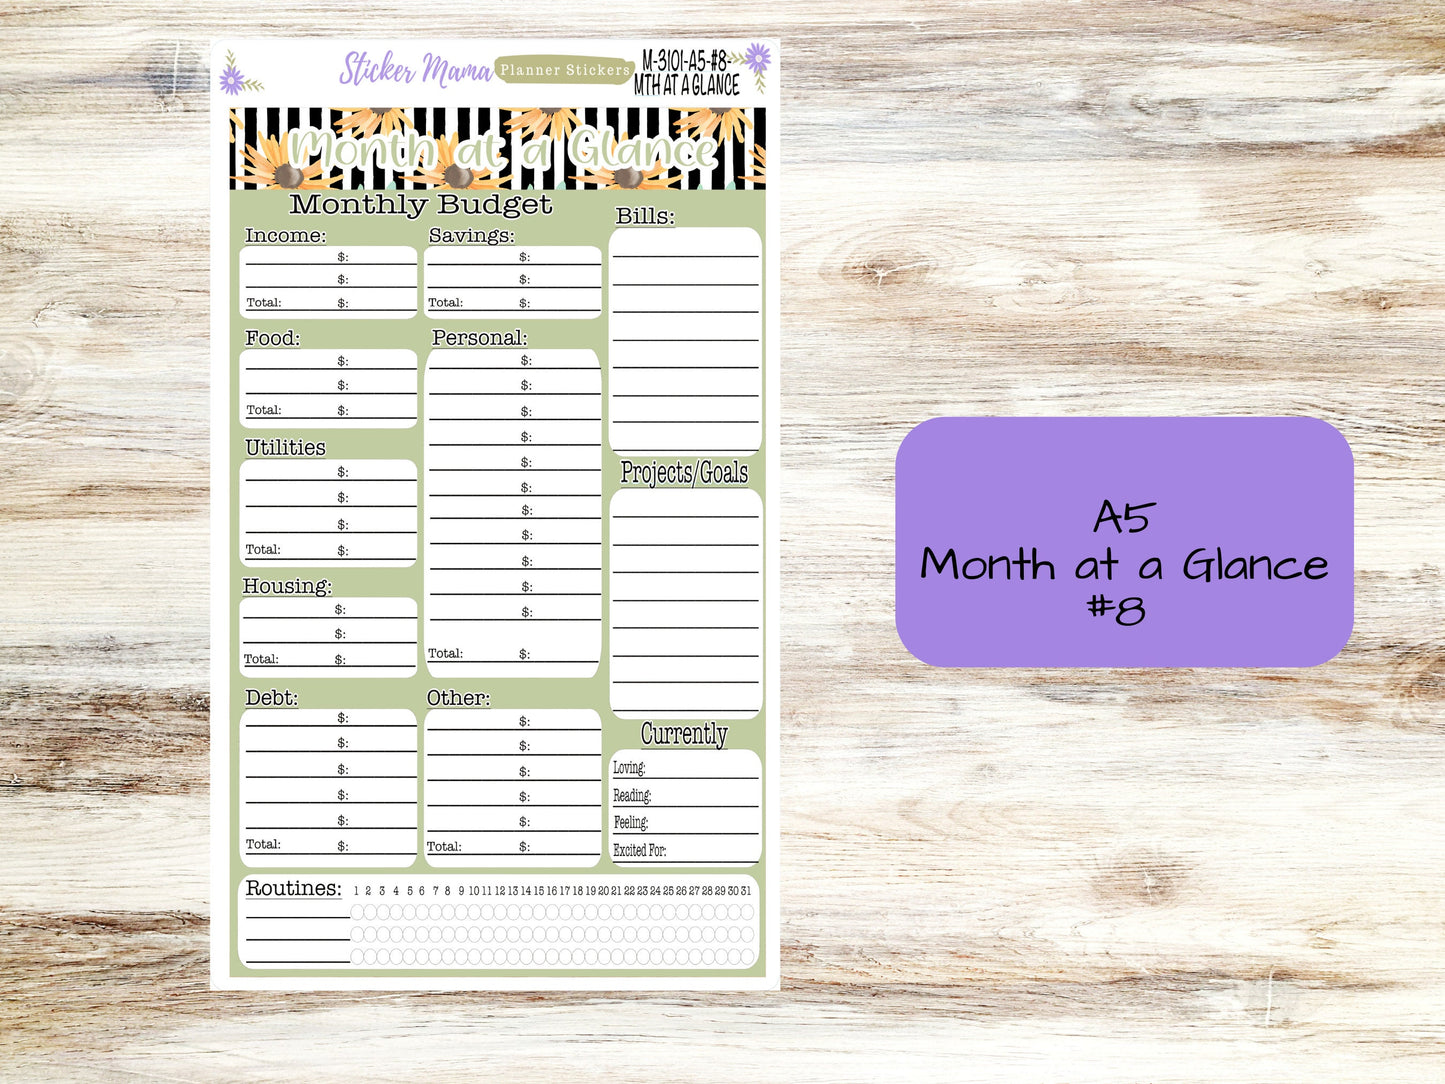 BUDGET - MONTH @ a GLANCE-3100 || A5 & 7x9 || Budget Sticker Kit || Notes Page Stickers || Planner Budget Kit